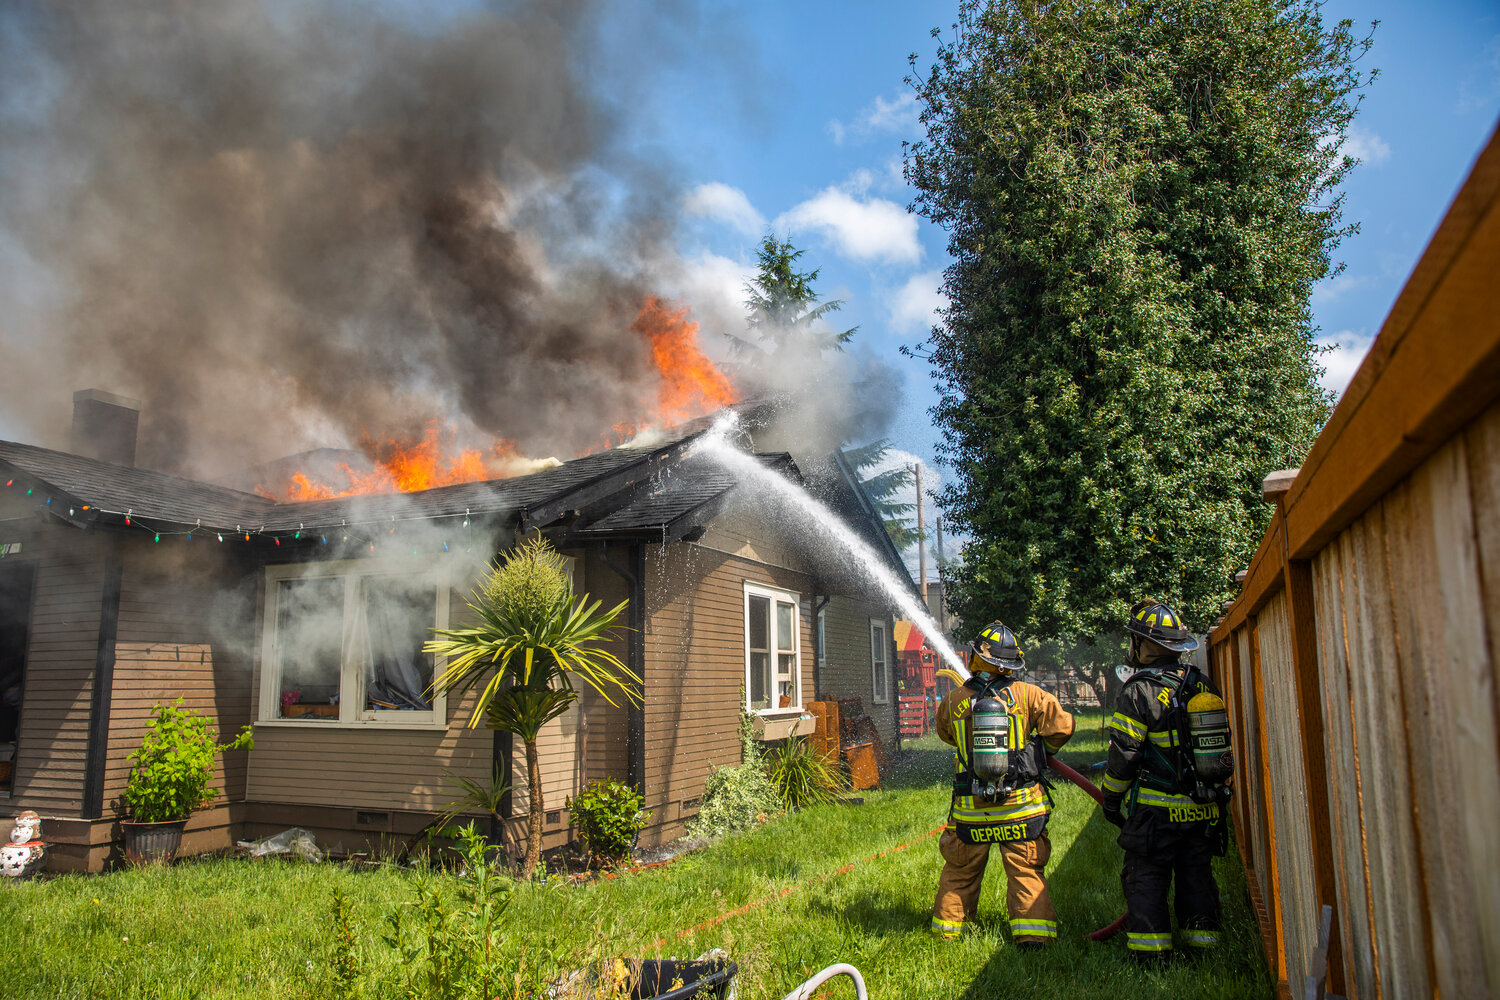 Lewis County and Riverside firefighters work to douse flames as a column of smoke rises from a residence in the 800 block of Centralia College Blvd. on Wednesday, May 24.